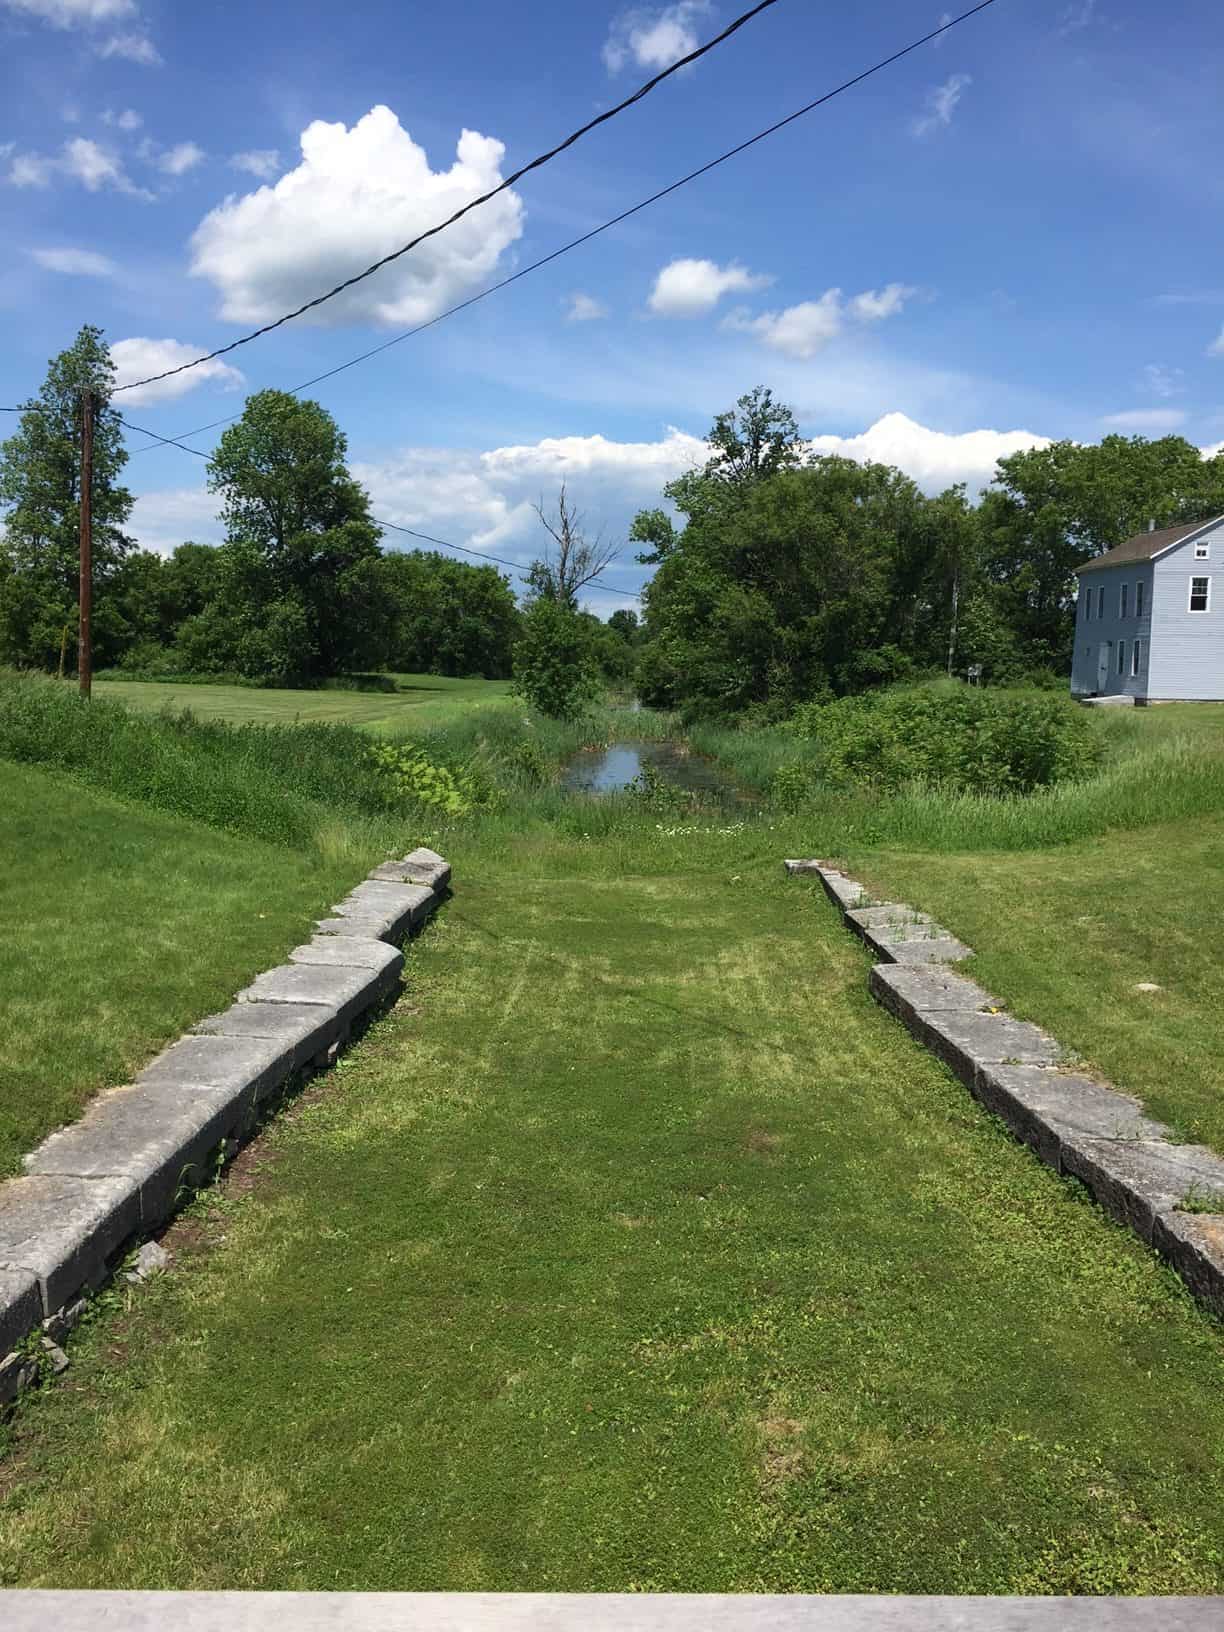 The original starting point of the first Erie Canal in Fort Hunter NY.